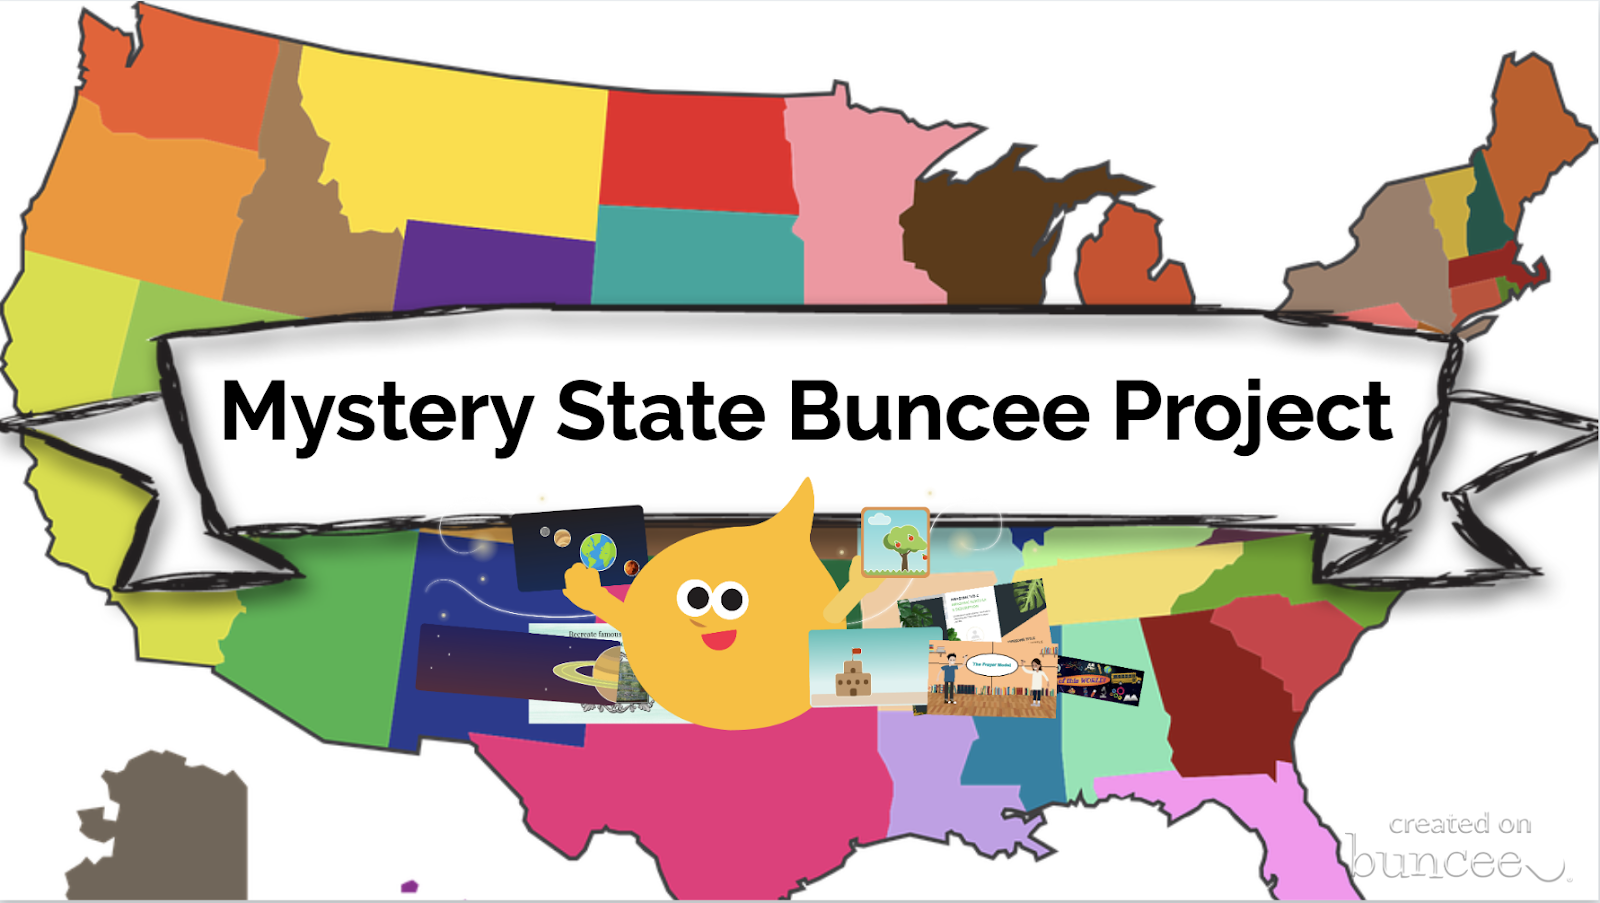 a mystery state project example for creating with buncee